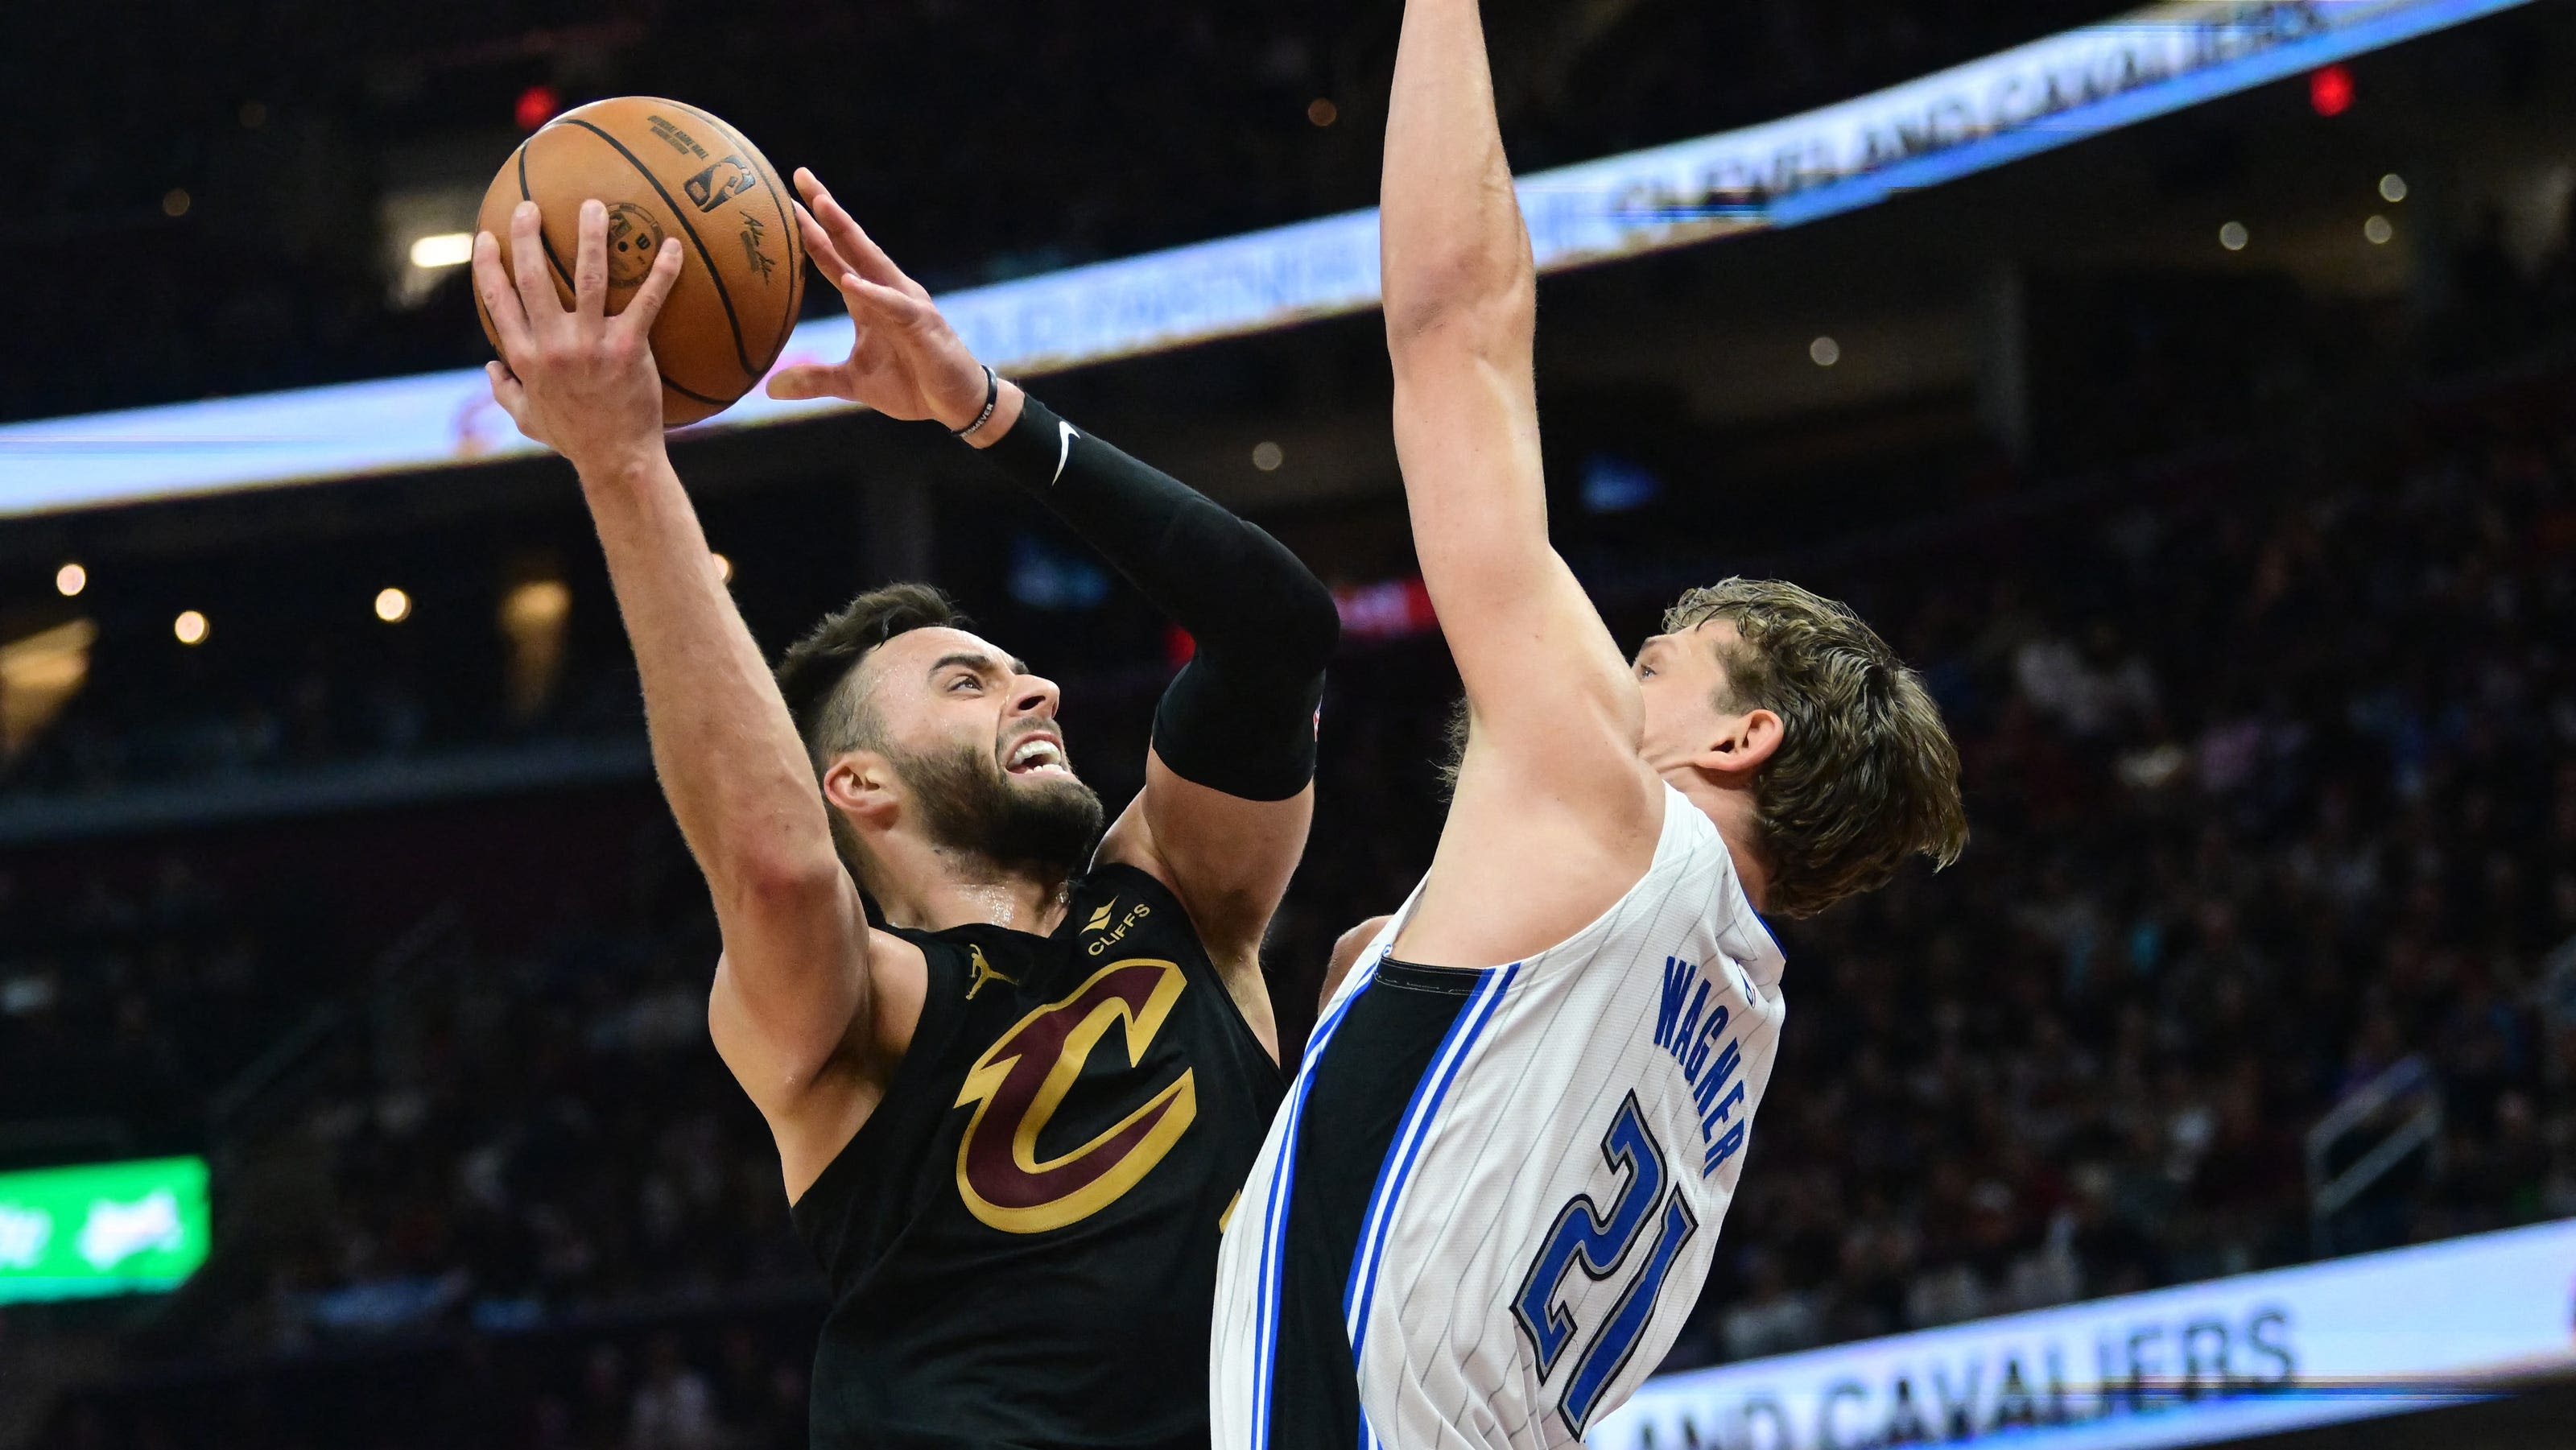 Cavaliers vs. Magic live score update, highlights; Cleveland looks to win series in Game 6